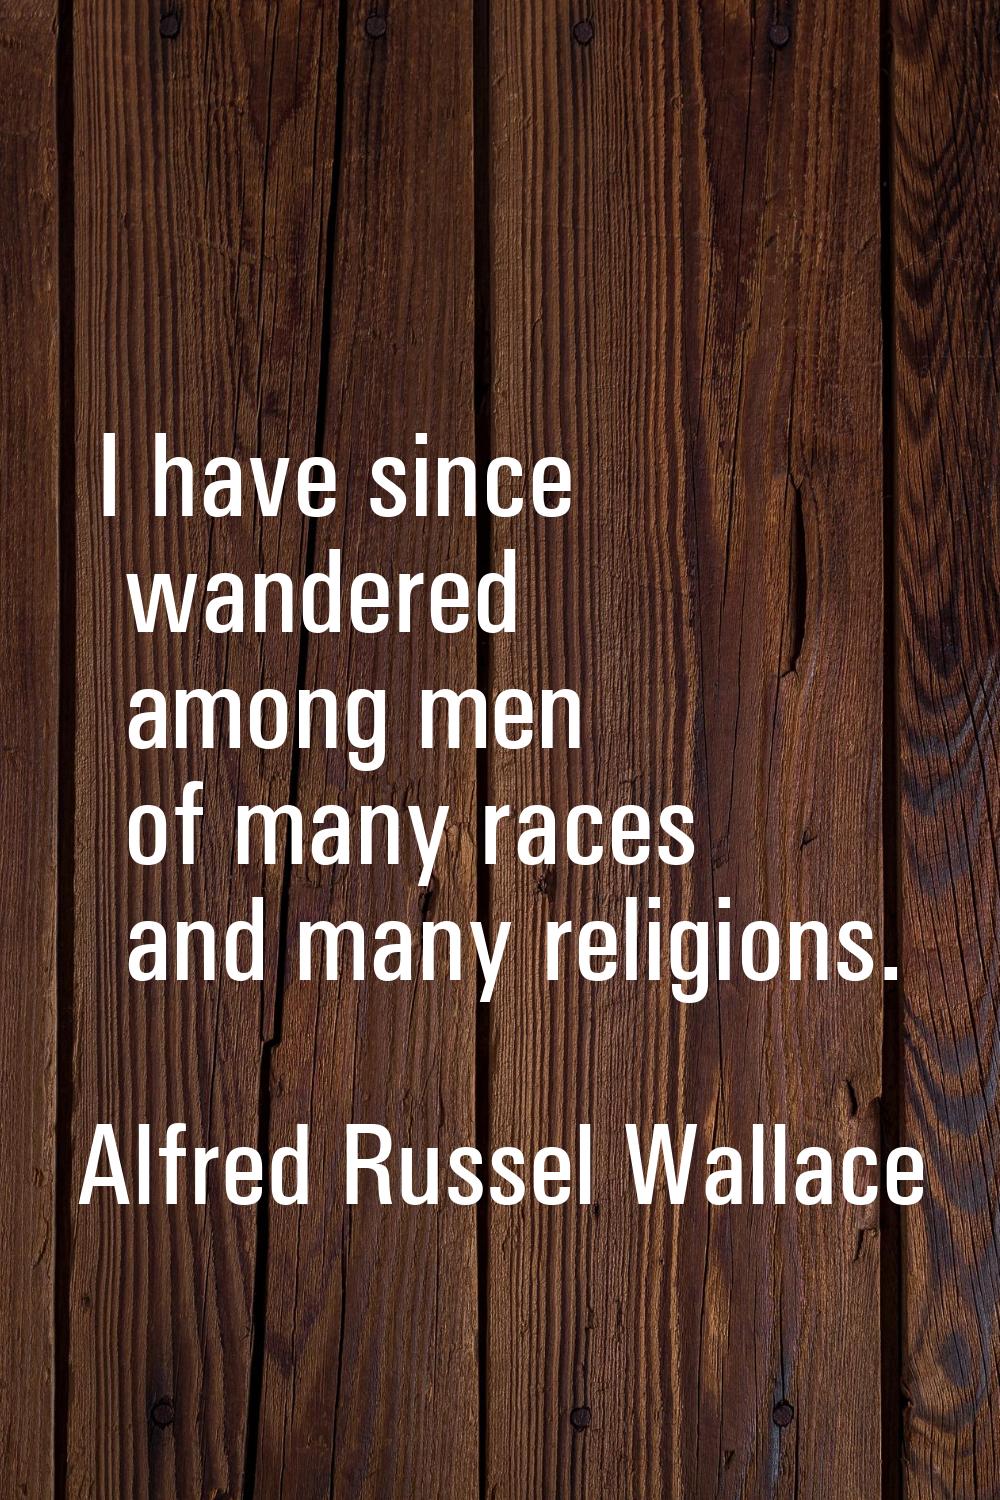 I have since wandered among men of many races and many religions.